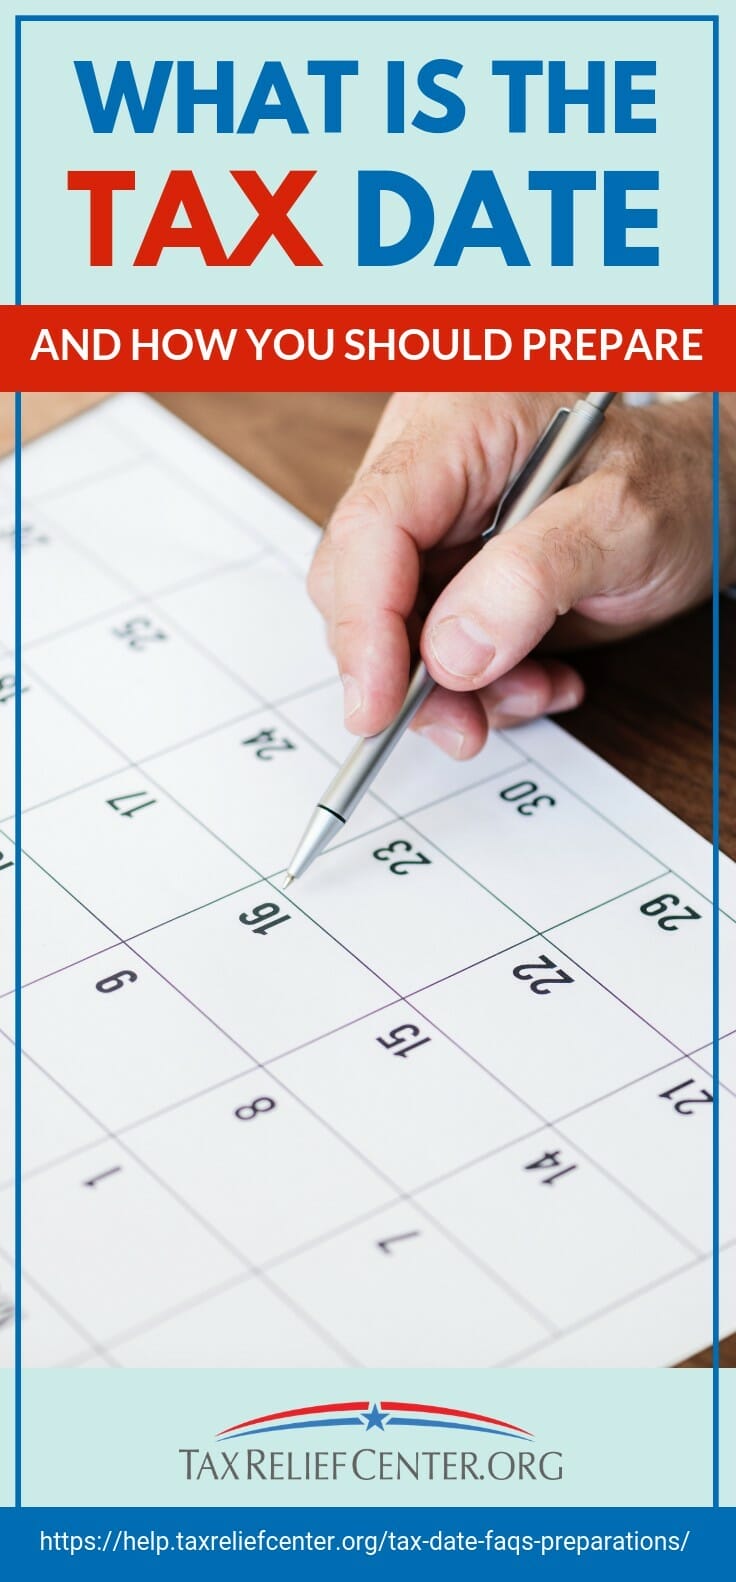 What Is The Tax Date And How You Should Prepare | https://help.taxreliefcenter.org/tax-date-faqs-preparations/